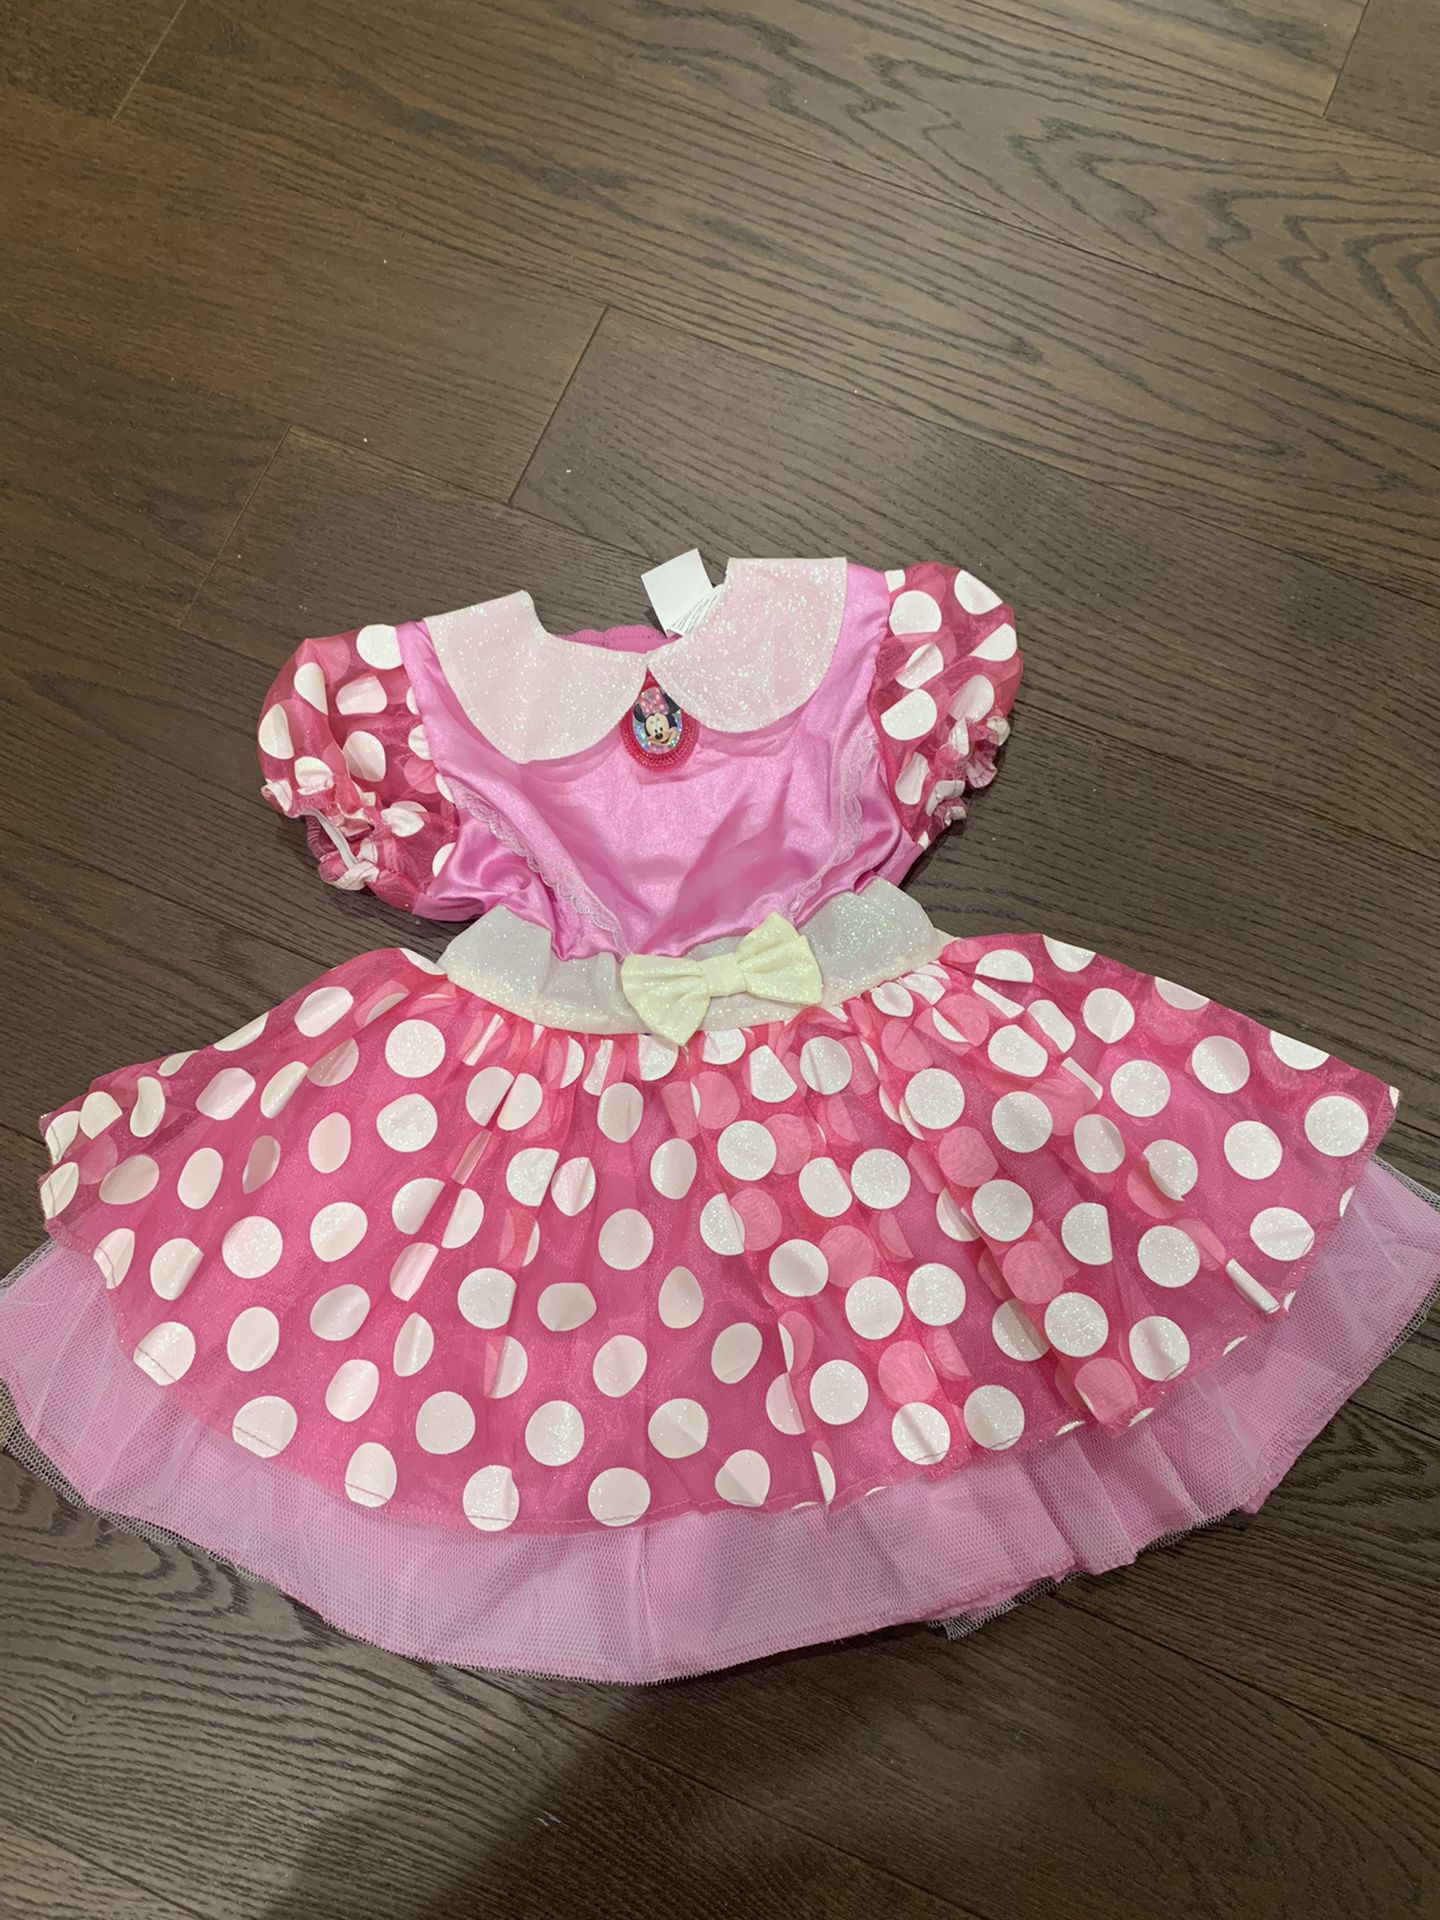 Minnie mouse halloween costume 3t